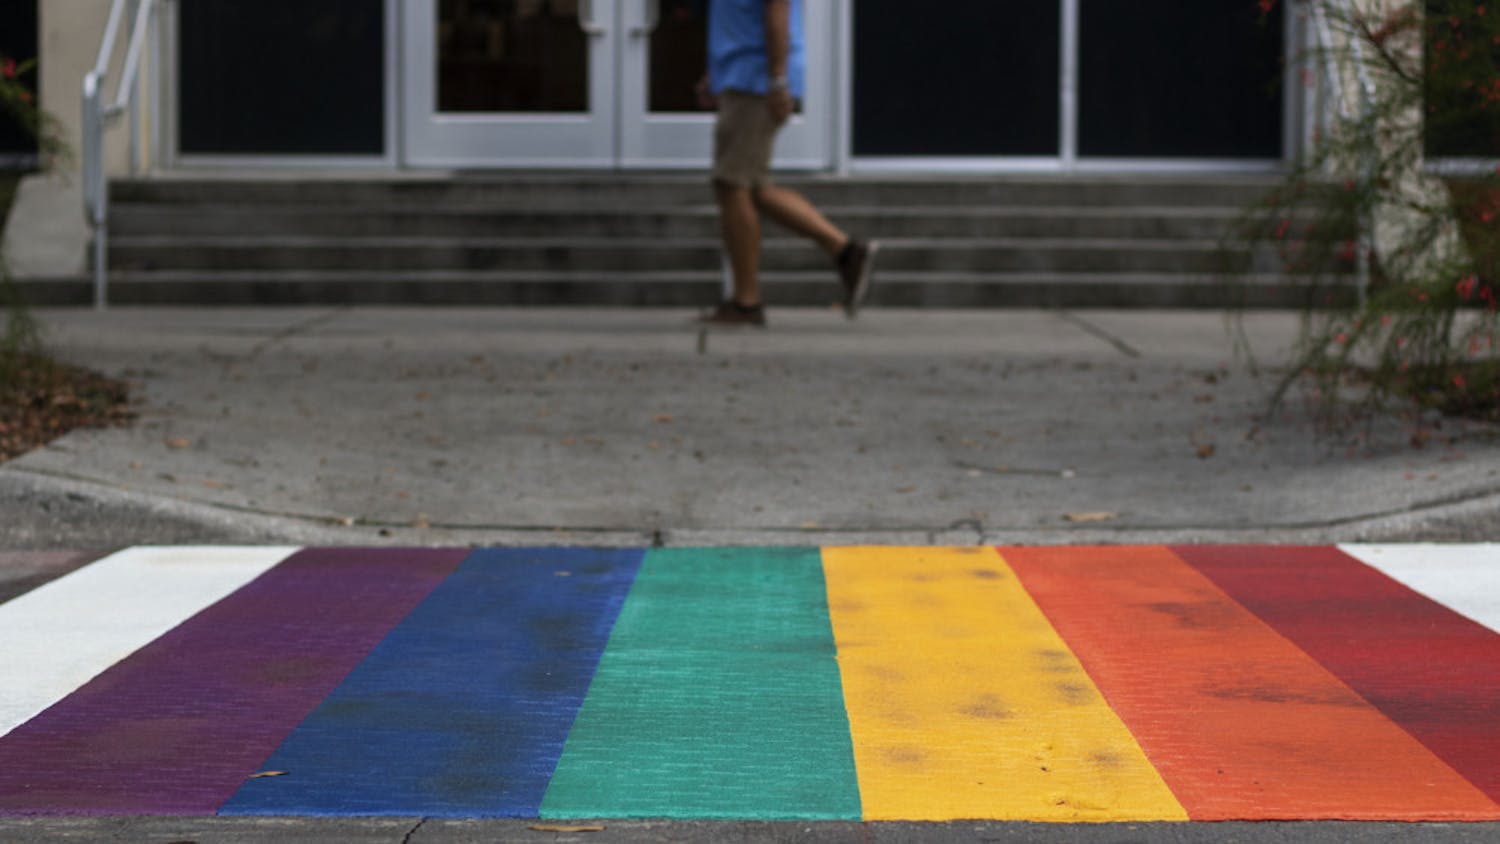 A pedestrian walks past one of the rainbow crosswalks Tuesday evening in downtown Gainesville near Bo Diddley Plaza.